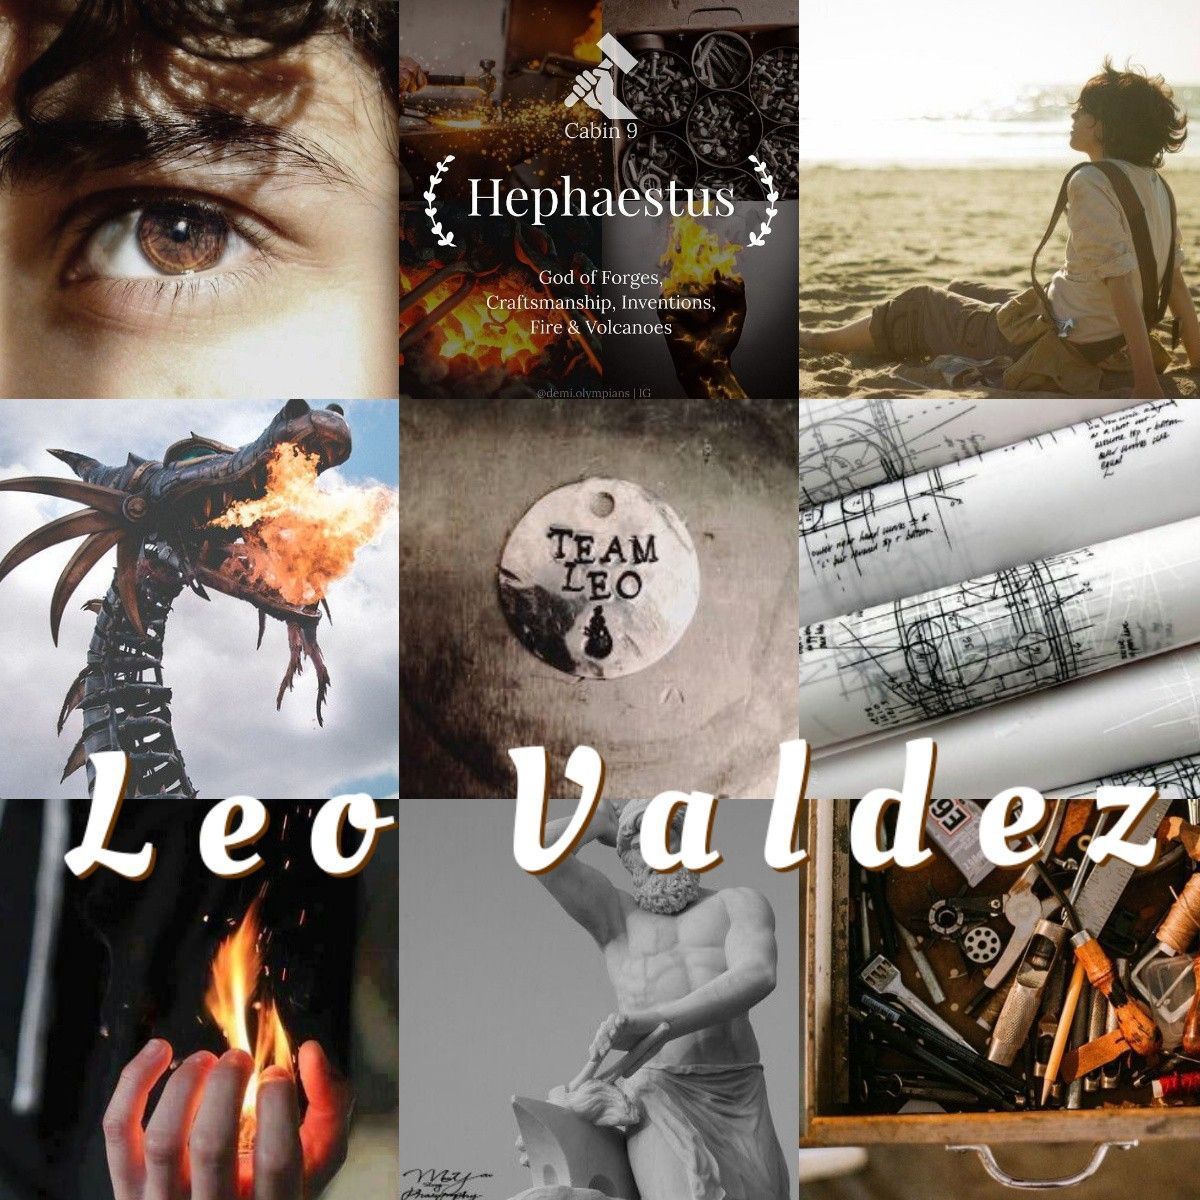 Leo Valdez Aesthetic - a collage of images including a close up of a person's eye, a dragon, a person sitting on the beach, a close up of a flame, a sculpture, a book, a drawing of a helmet, and a person working with tools - Leo Valdez